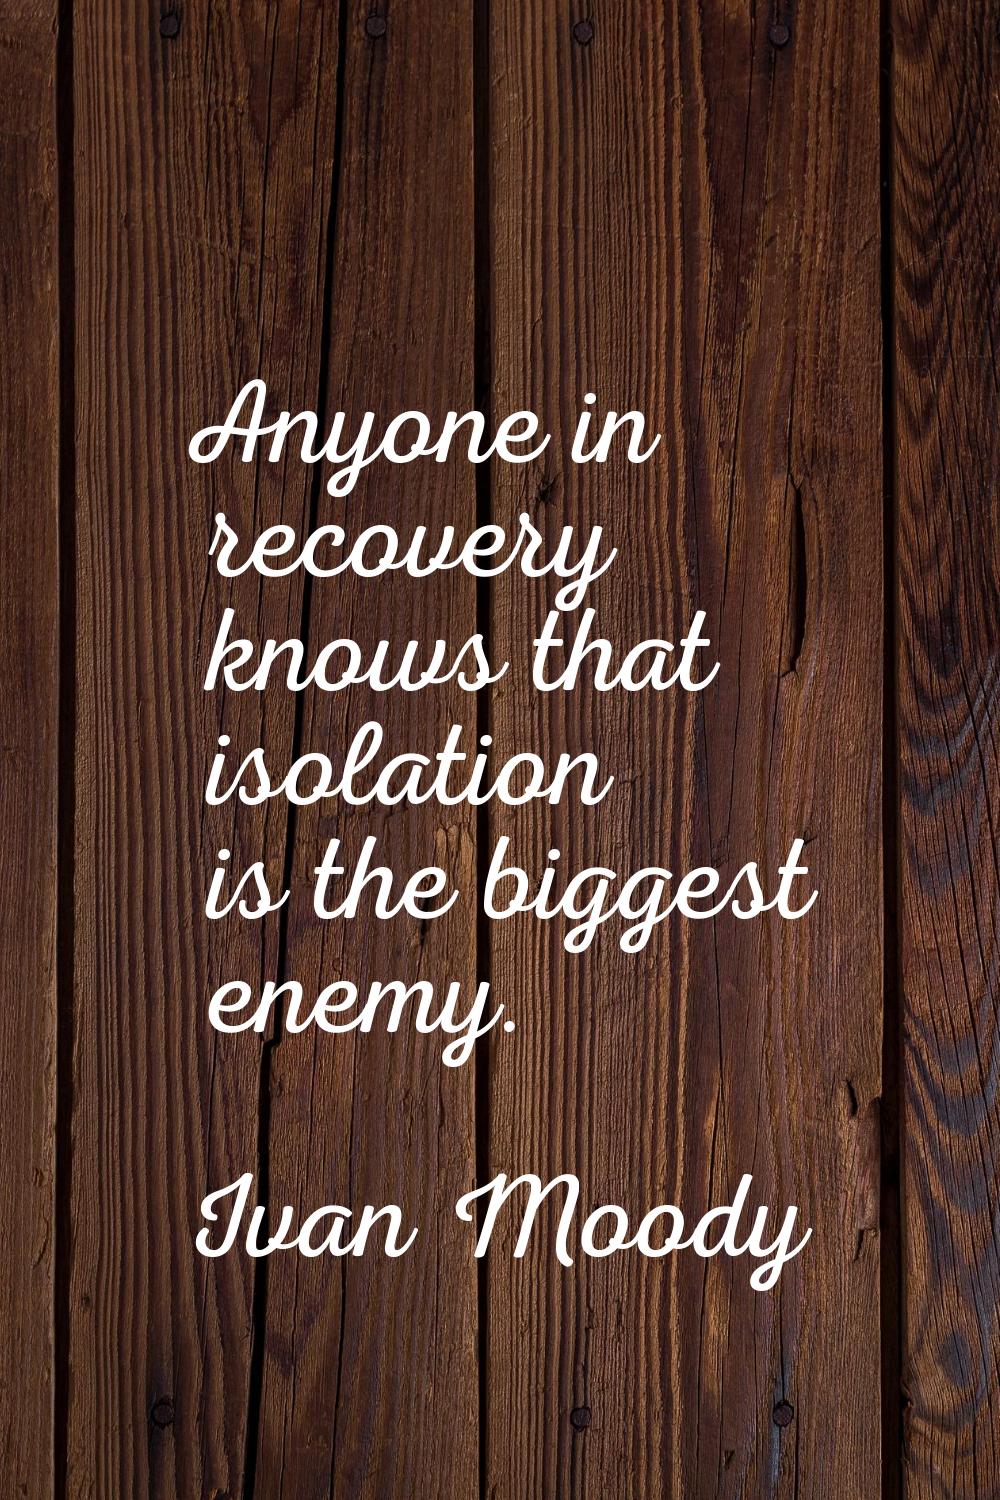 Anyone in recovery knows that isolation is the biggest enemy.